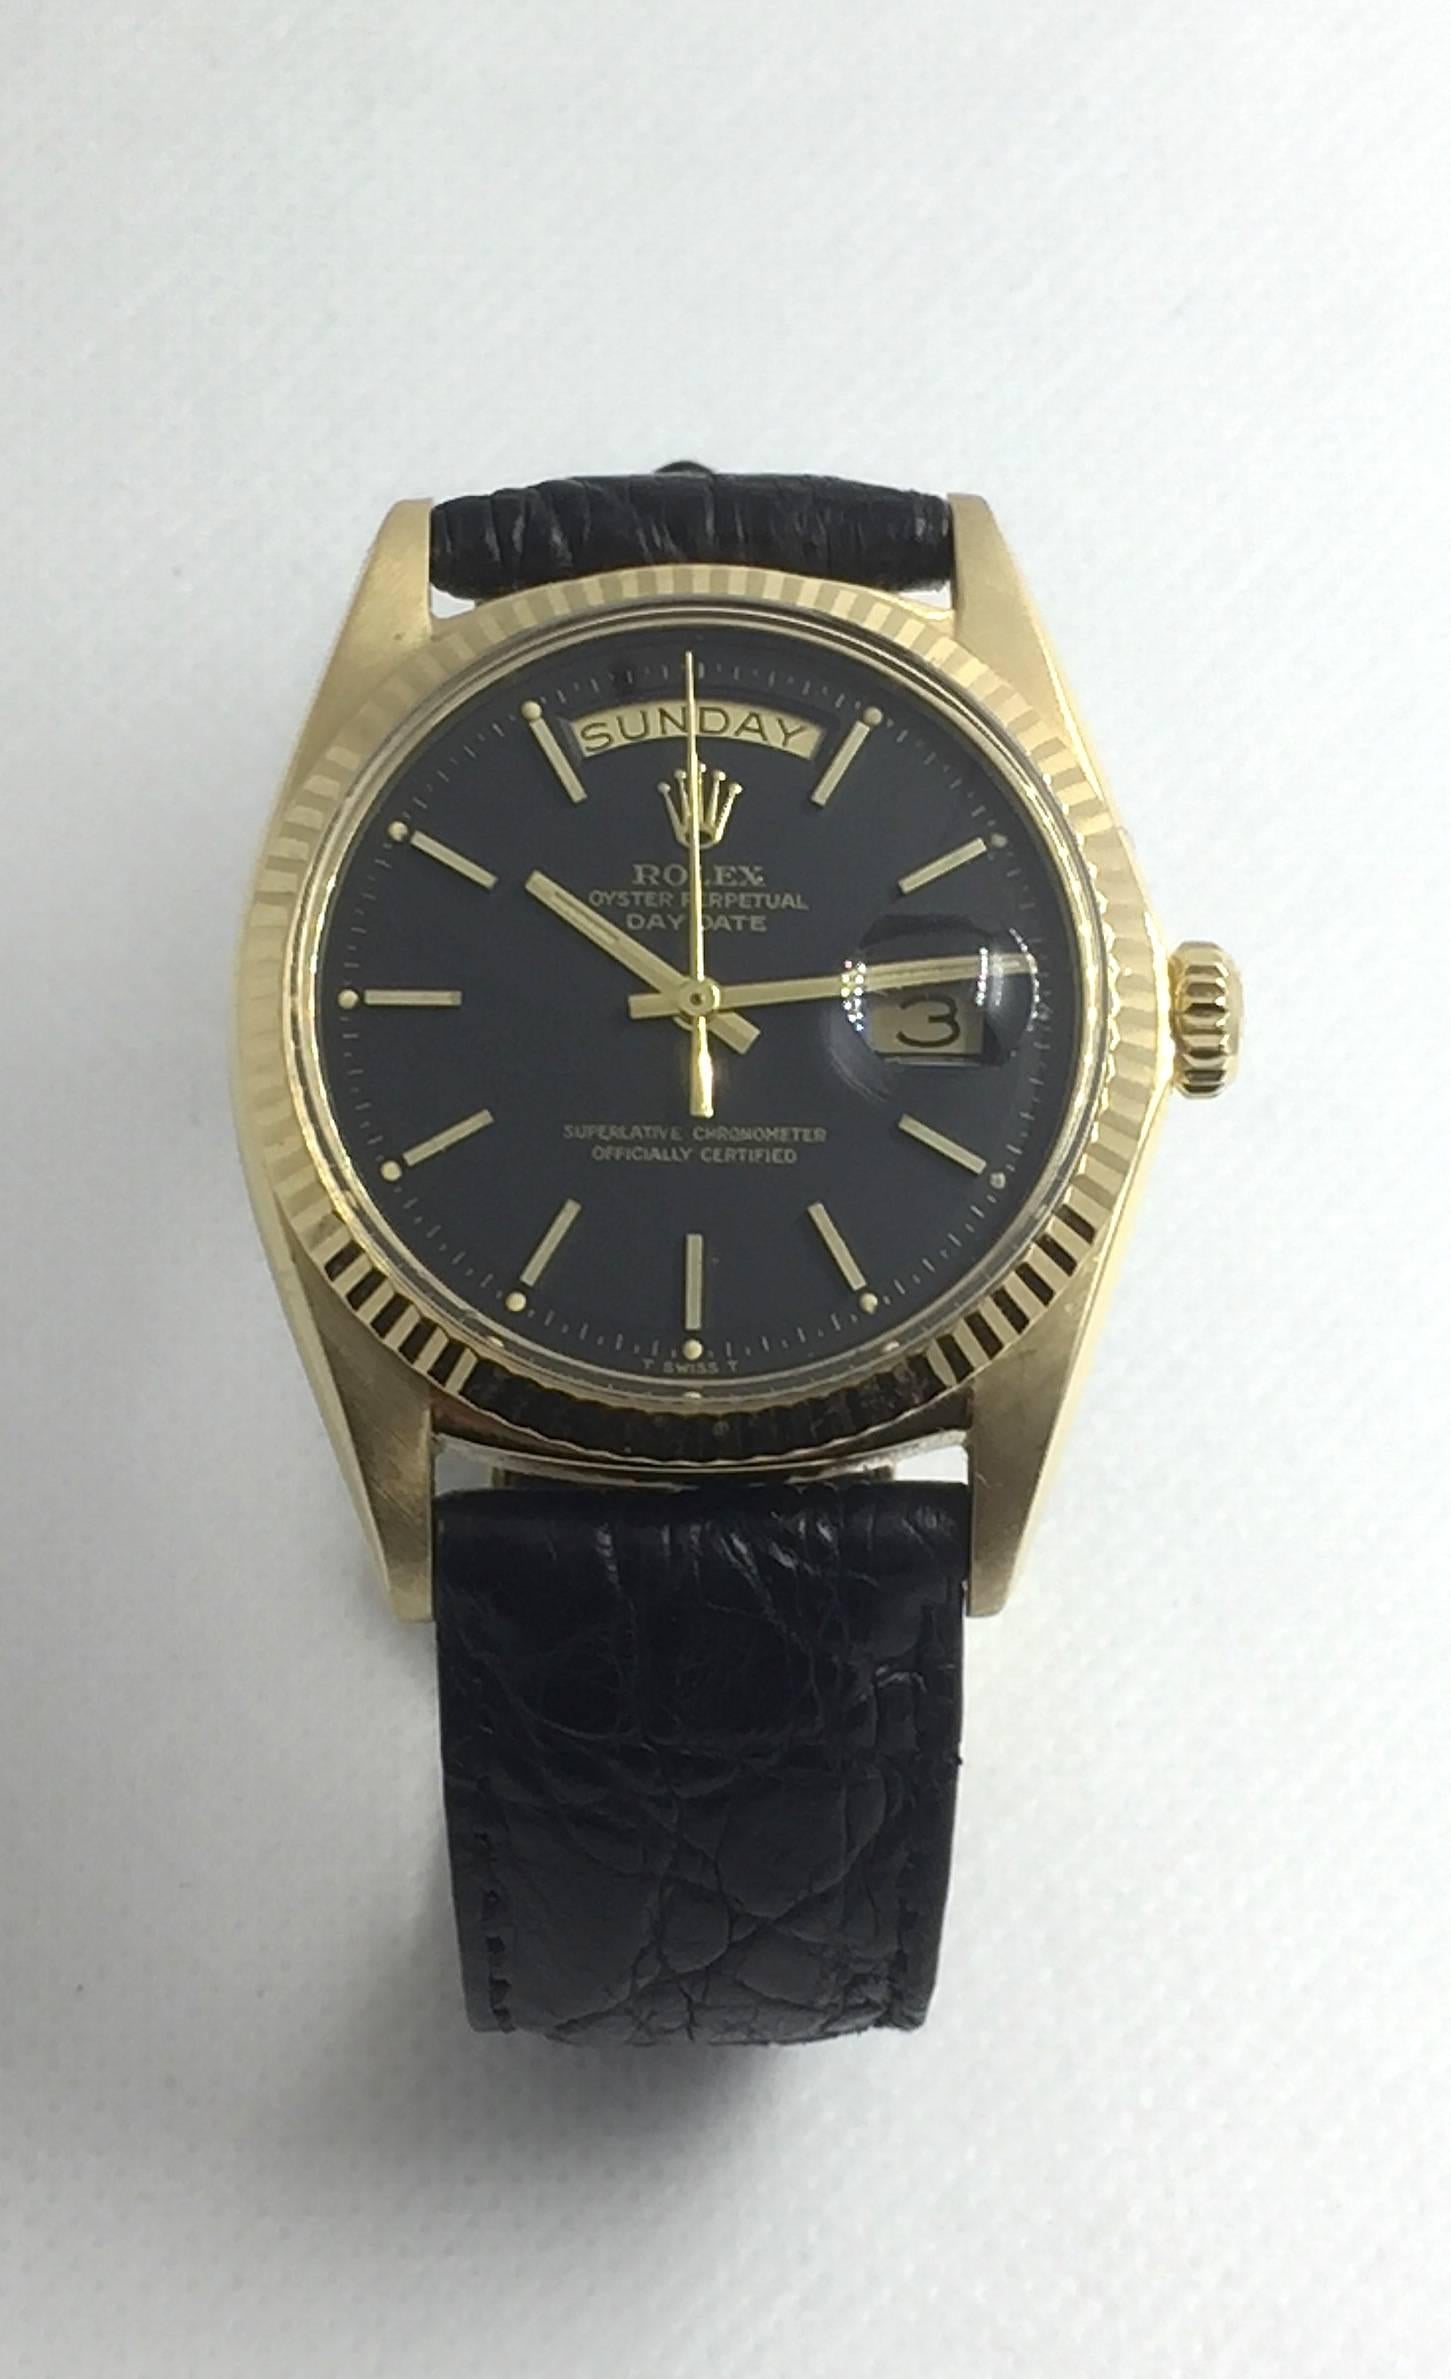 Rolex Yellow Gold 18K Oyster Perpetual Day-Date Presidential Wristwatch
Factory Black Pie-Pan Dial with Applied Hour Markers
18K Yellow Gold Fluted Bezel
36mm in size 
Rolex Calibre Base 1500 Automatic Movement
Day and Date Functions
Acrylic